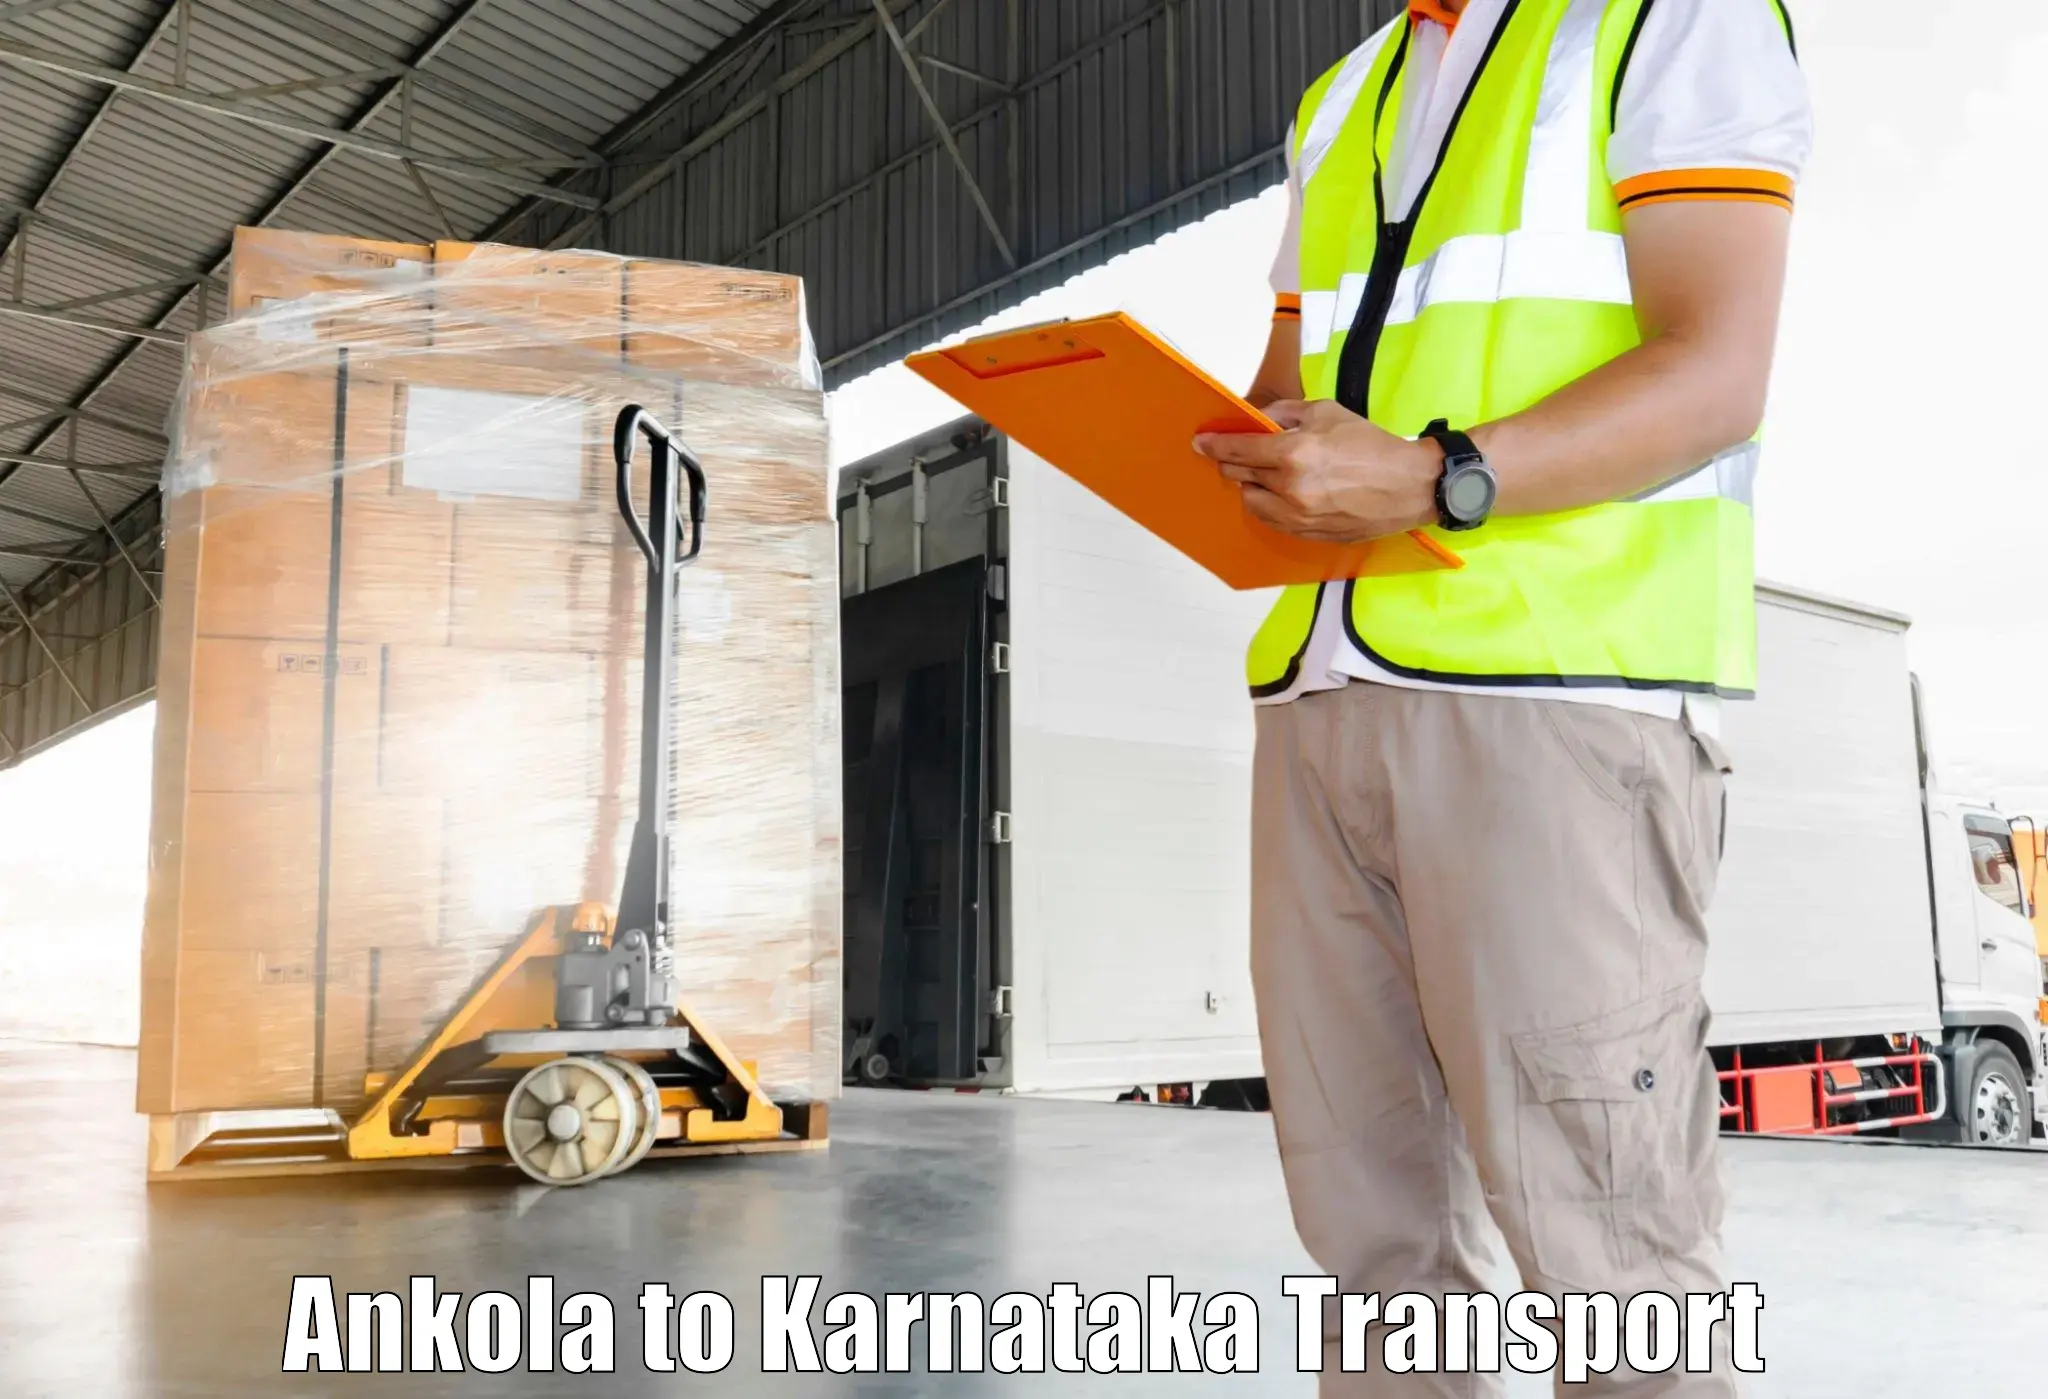 Lorry transport service Ankola to Manipal Academy of Higher Education